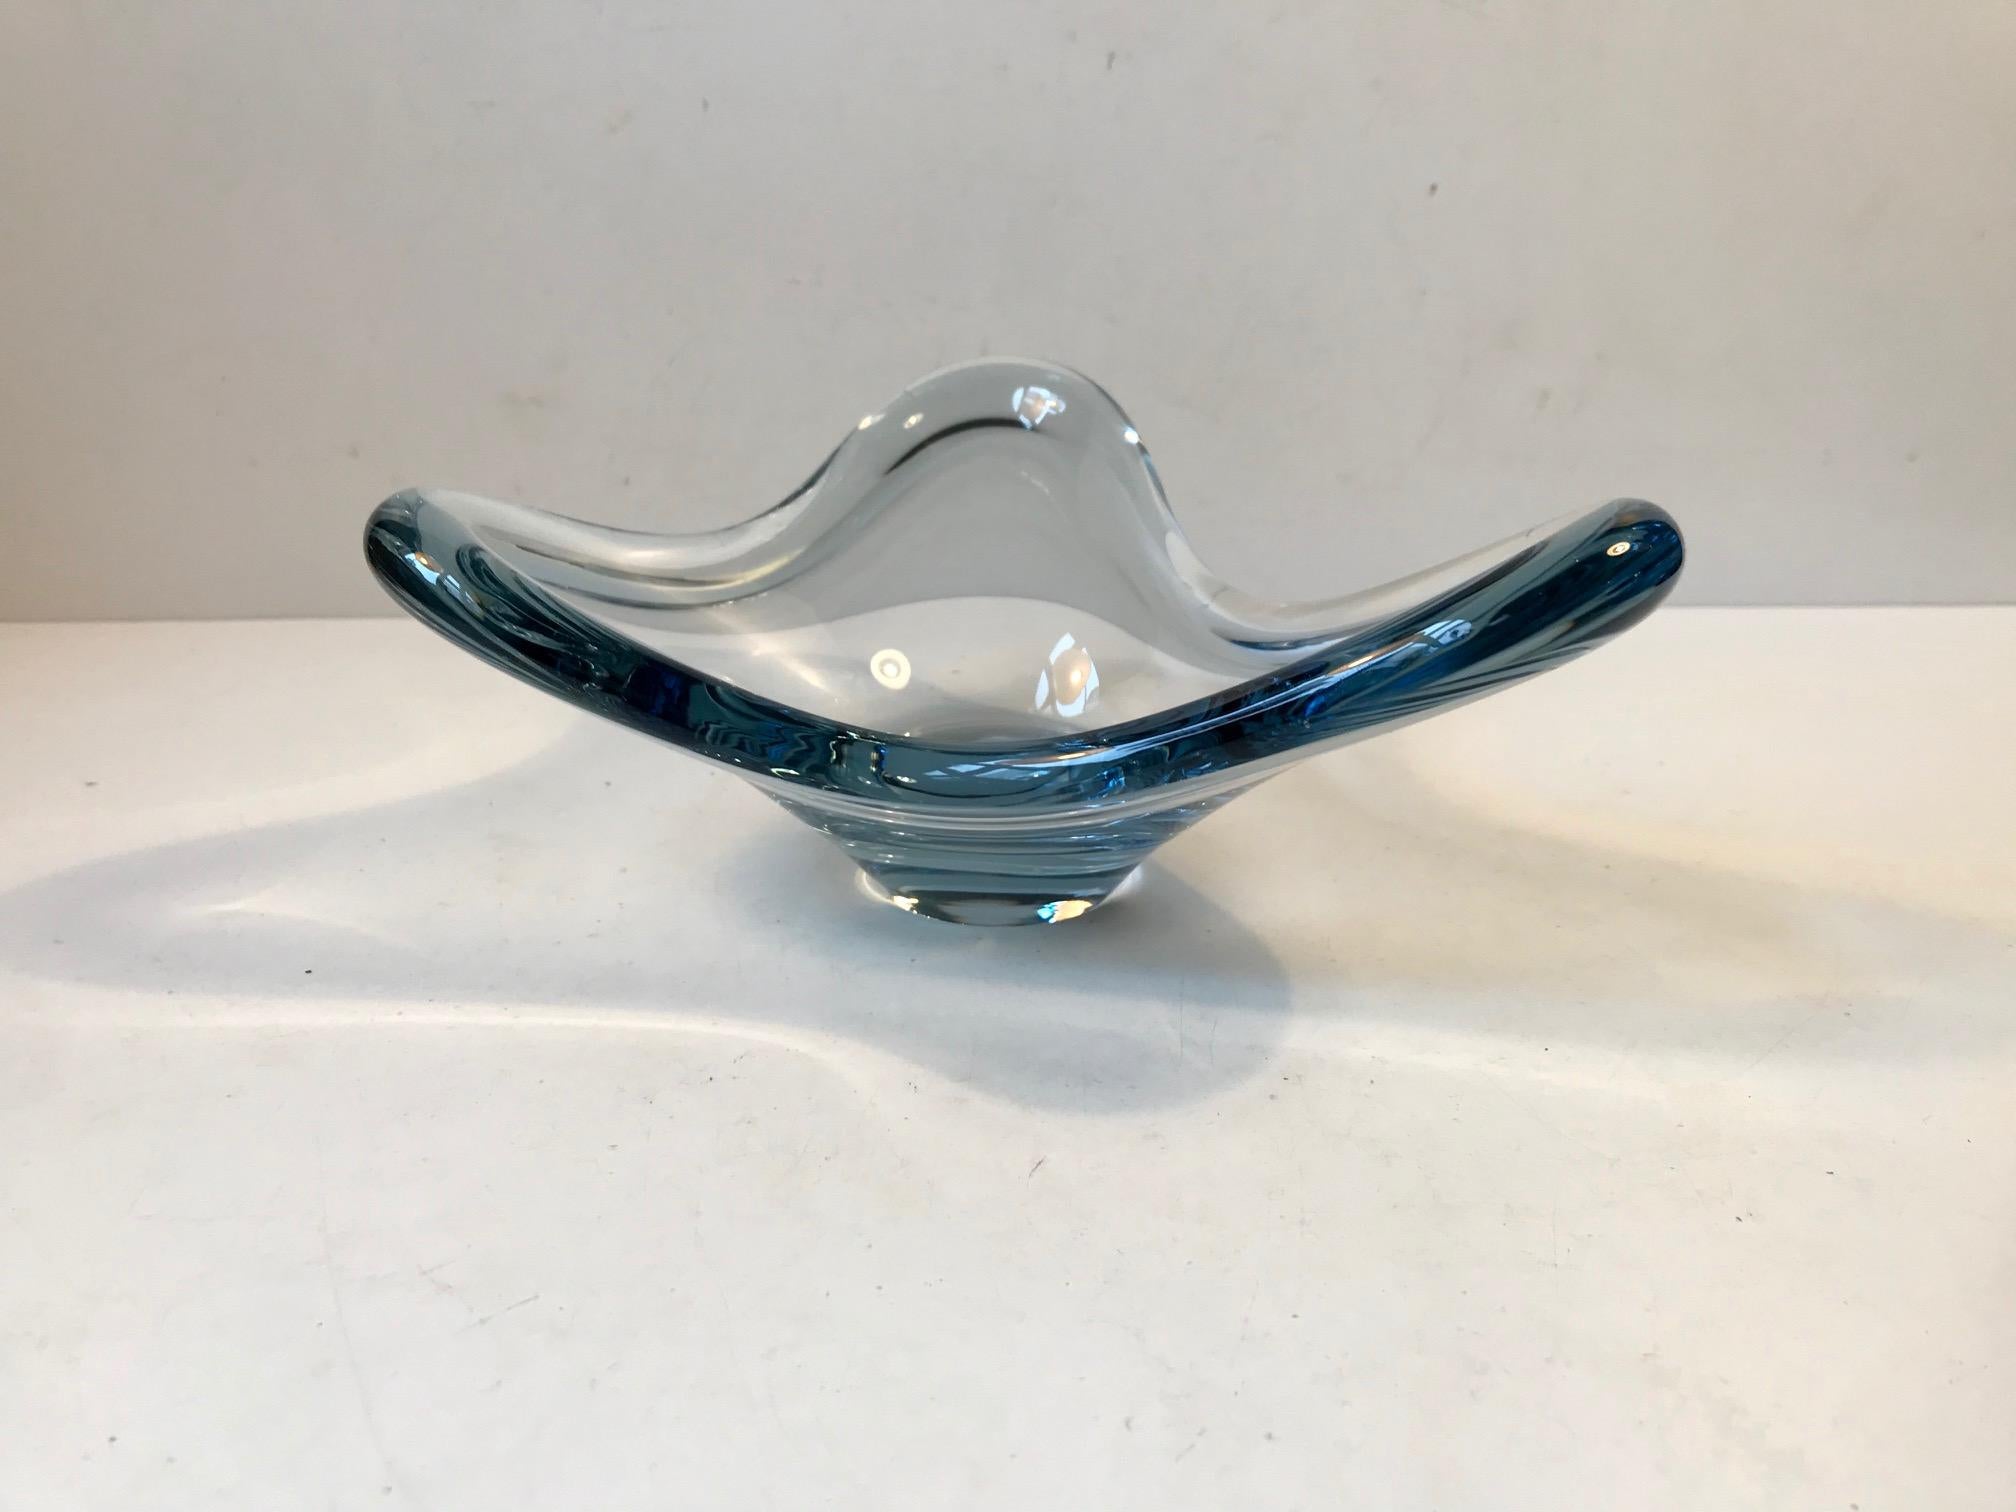 Wavy hand blown aqua blue bowl designed by Per Lütken in 1964. This piece was manufactured at Holmegaard in Denmark during the mid-late 1960s. It is called Aqua or Fionia and it is signed and numbered by the designer.